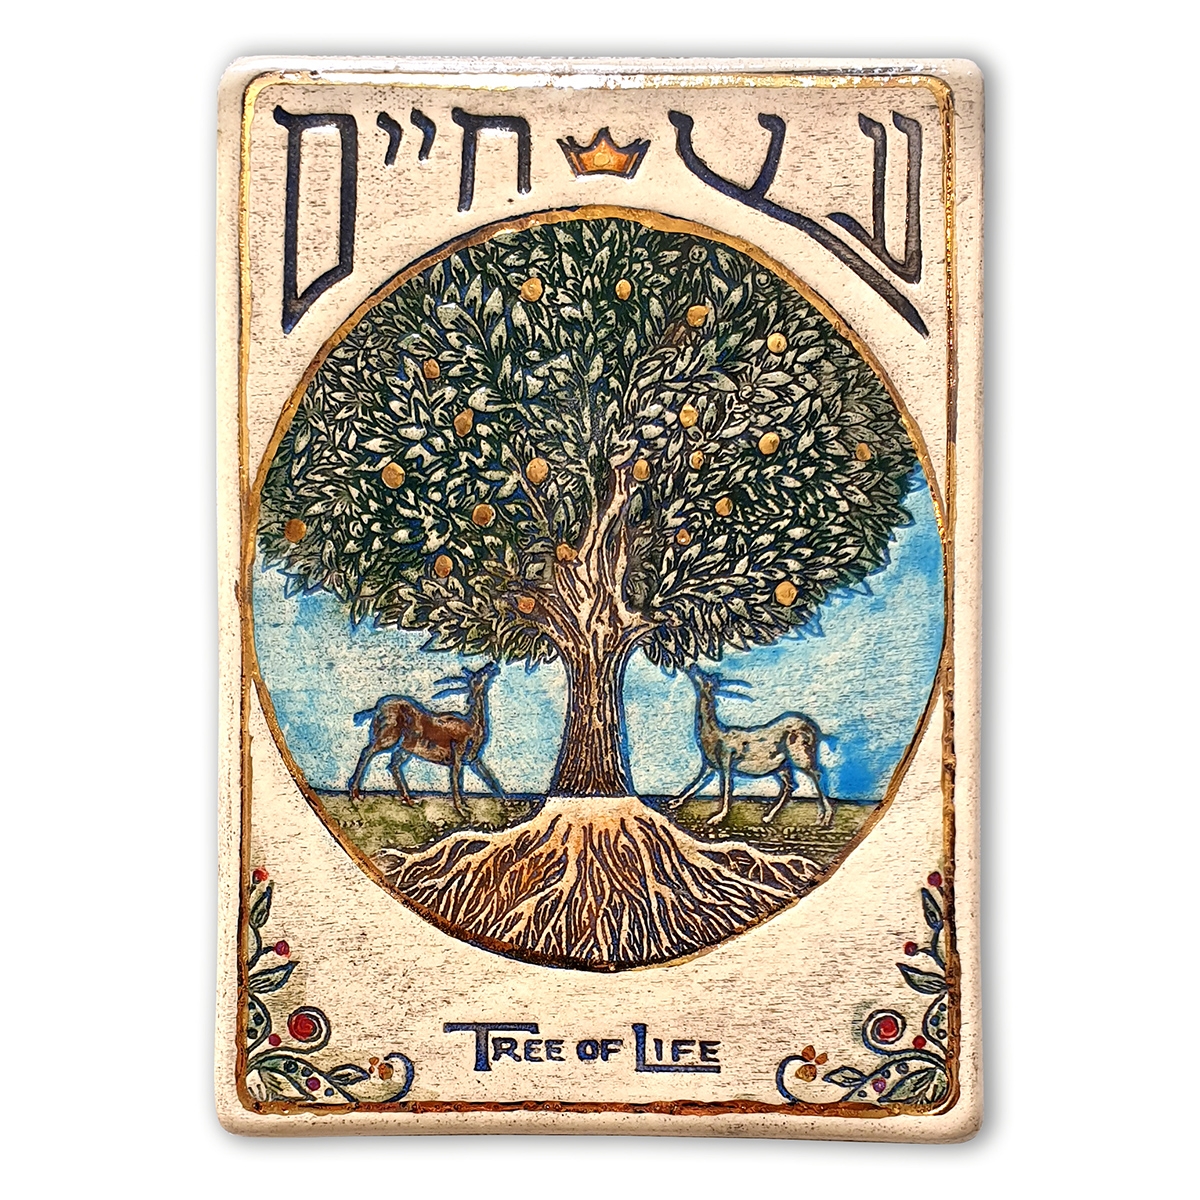 Art in Clay Handmade Tree of Life Ceramic Plaque Wall Hanging - 1